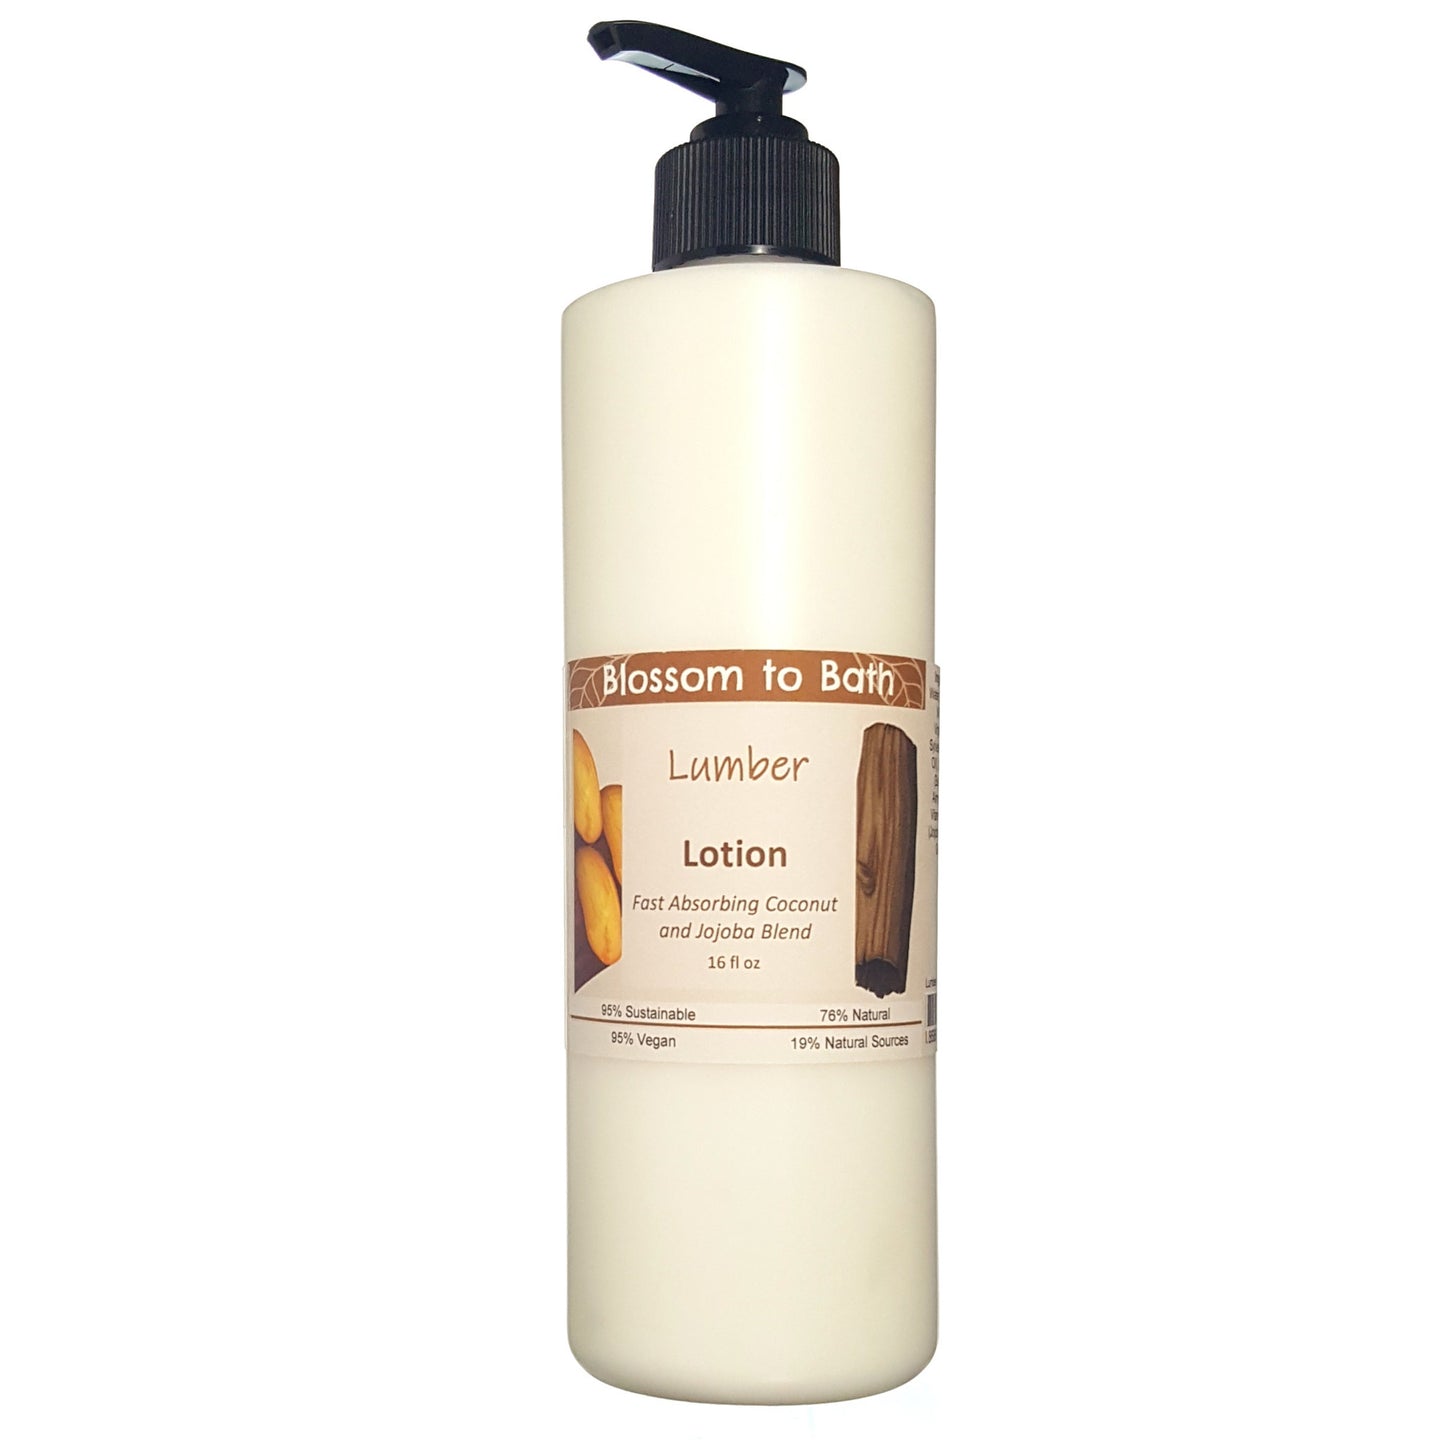 Buy Blossom to Bath Lumber Lotion from Flowersong Soap Studio.  Daily moisture luxury that soaks in quickly made with organic oils and butters that soften and smooth the skin  A masculine fragrance that echoes fresh cut trees.